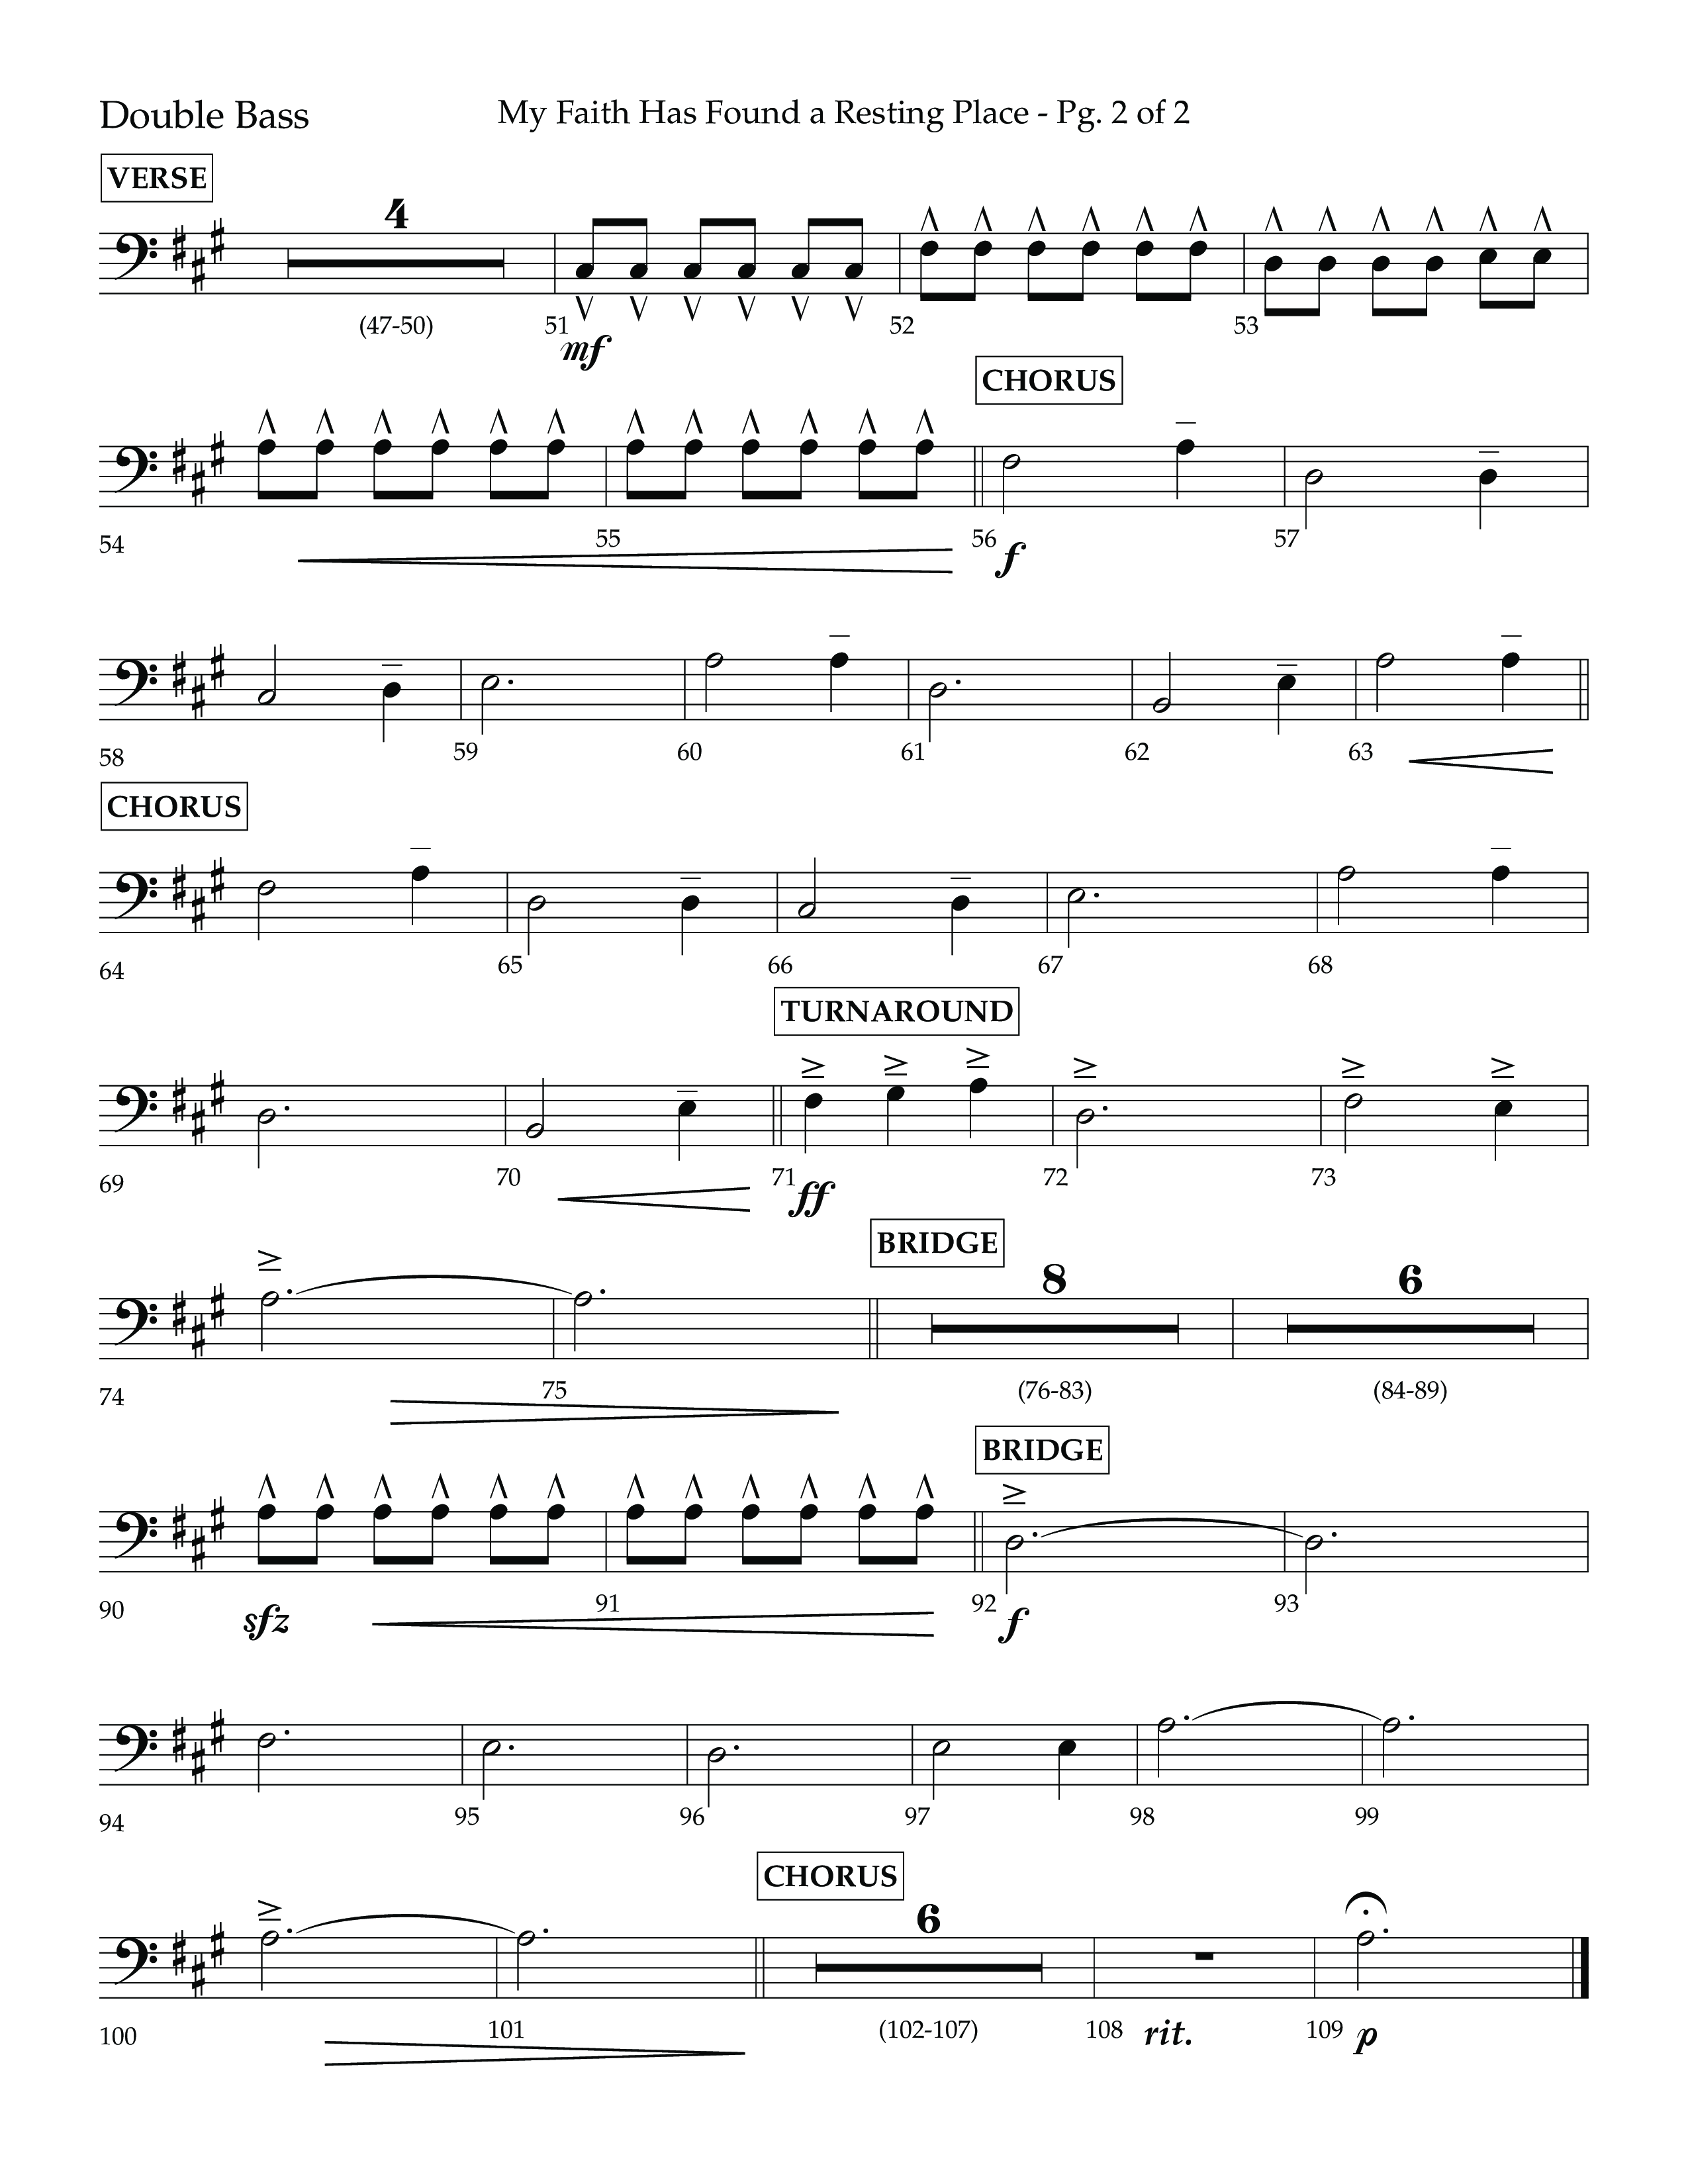 My Faith Has Found a Resting Place (Forever Found) (Choral Anthem SATB) Double Bass (Lifeway Choral / Arr. John Bolin / Orch. Cliff Duren)